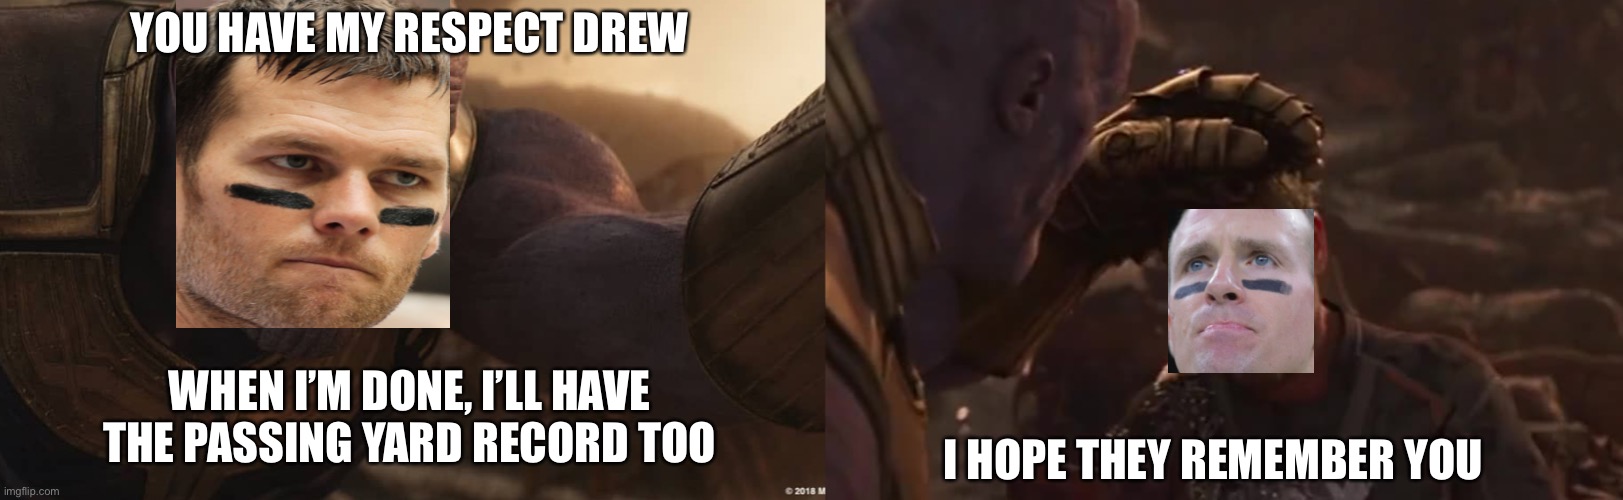 Tom Thanos | YOU HAVE MY RESPECT DREW; WHEN I’M DONE, I’LL HAVE THE PASSING YARD RECORD TOO; I HOPE THEY REMEMBER YOU | image tagged in nfl memes | made w/ Imgflip meme maker